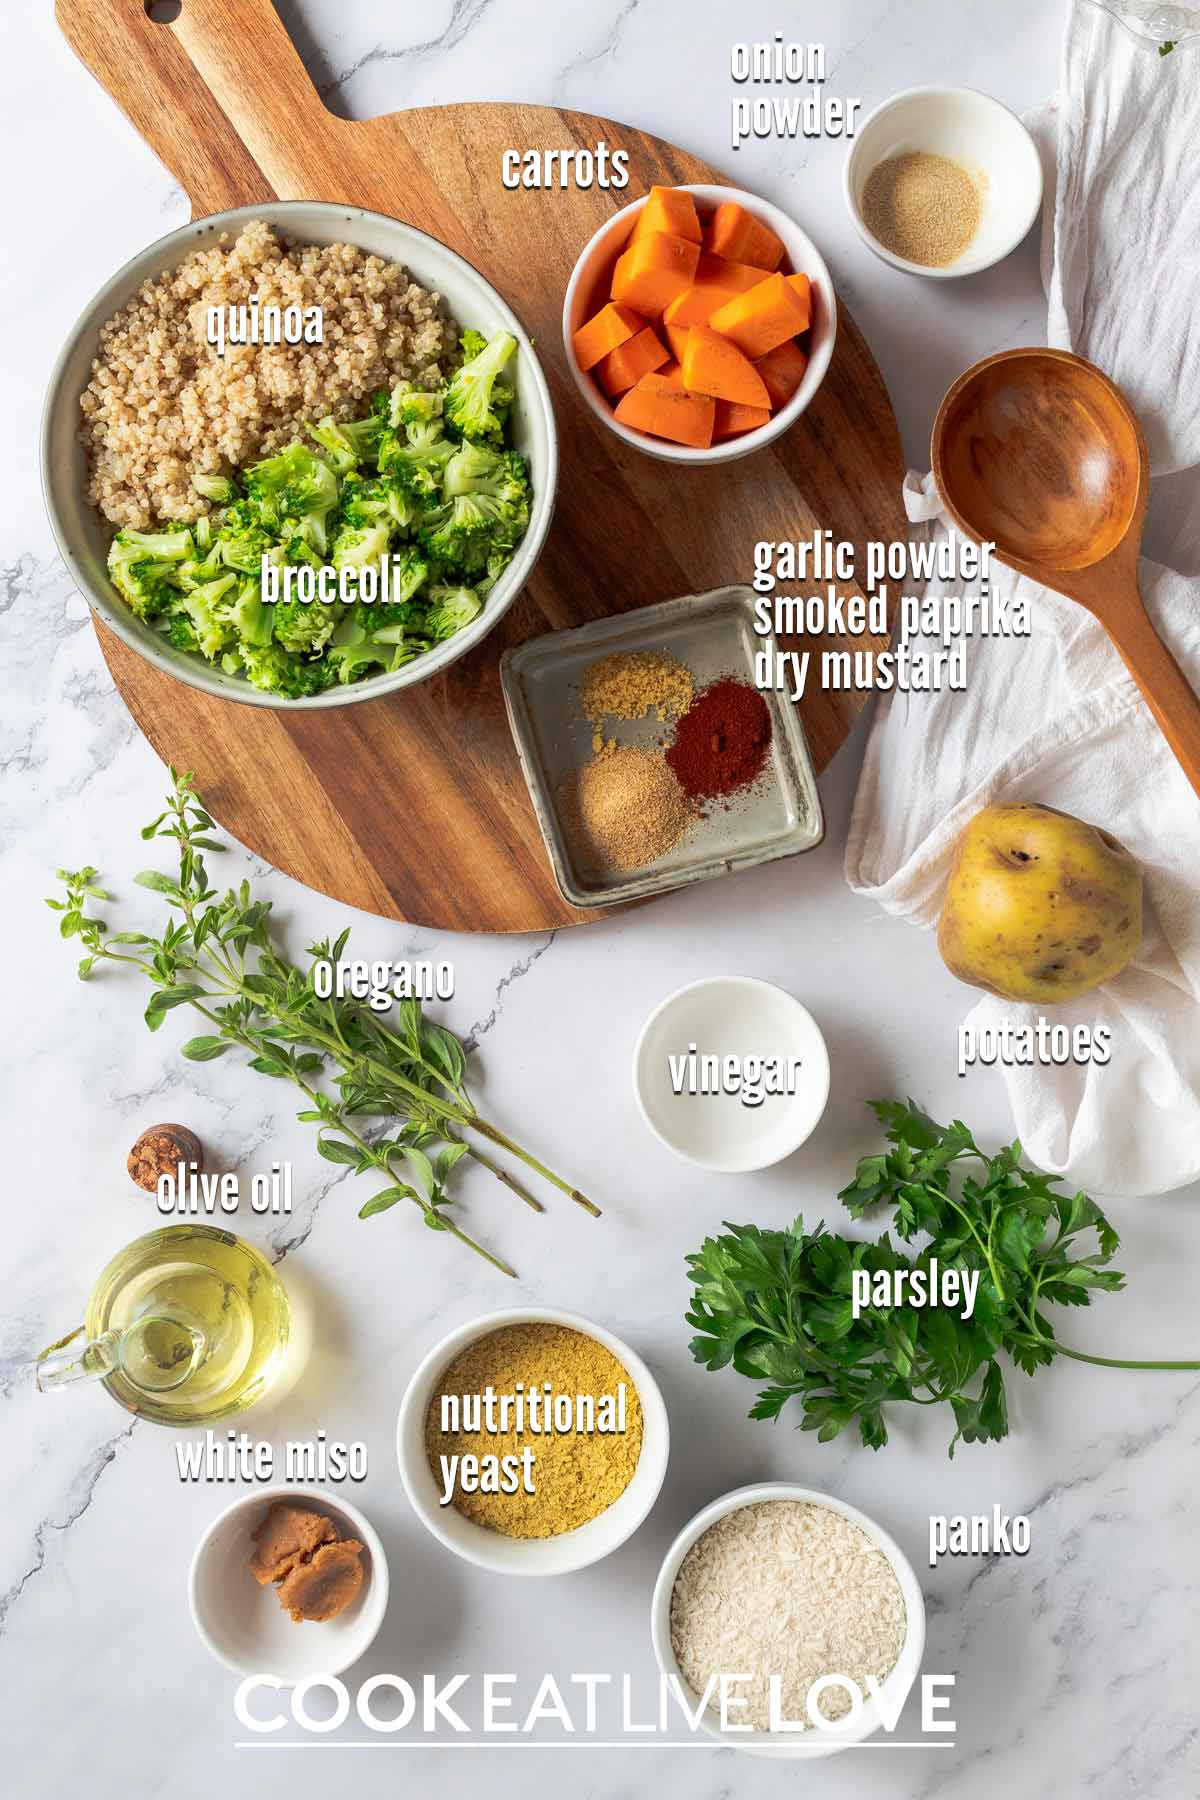 Ingredients to make cheesy broccoli quinoa casserole on the table.